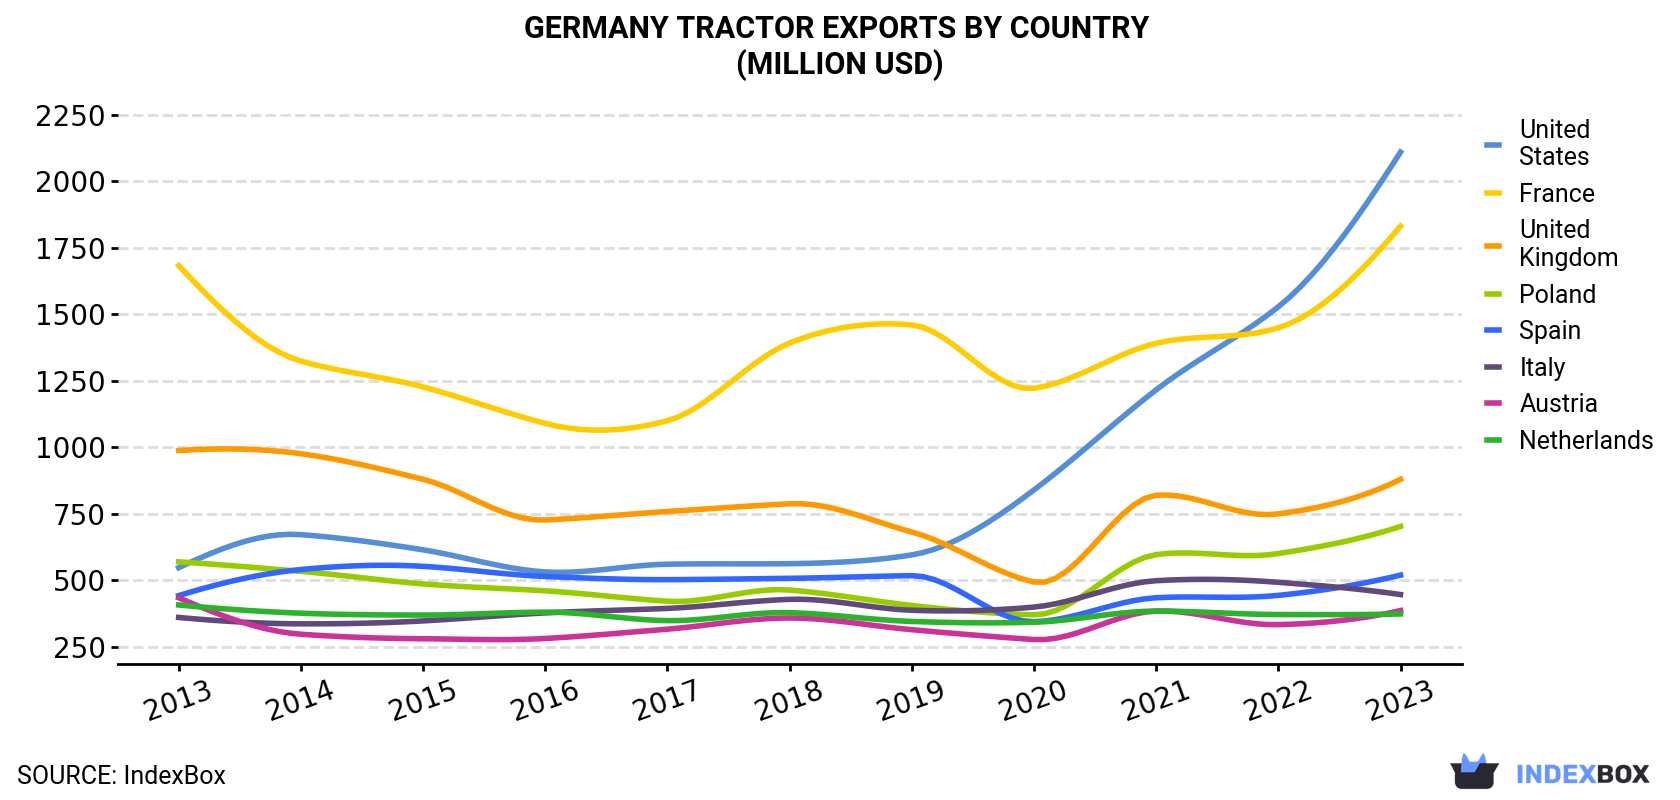 Germany Tractor Exports By Country (Million USD)